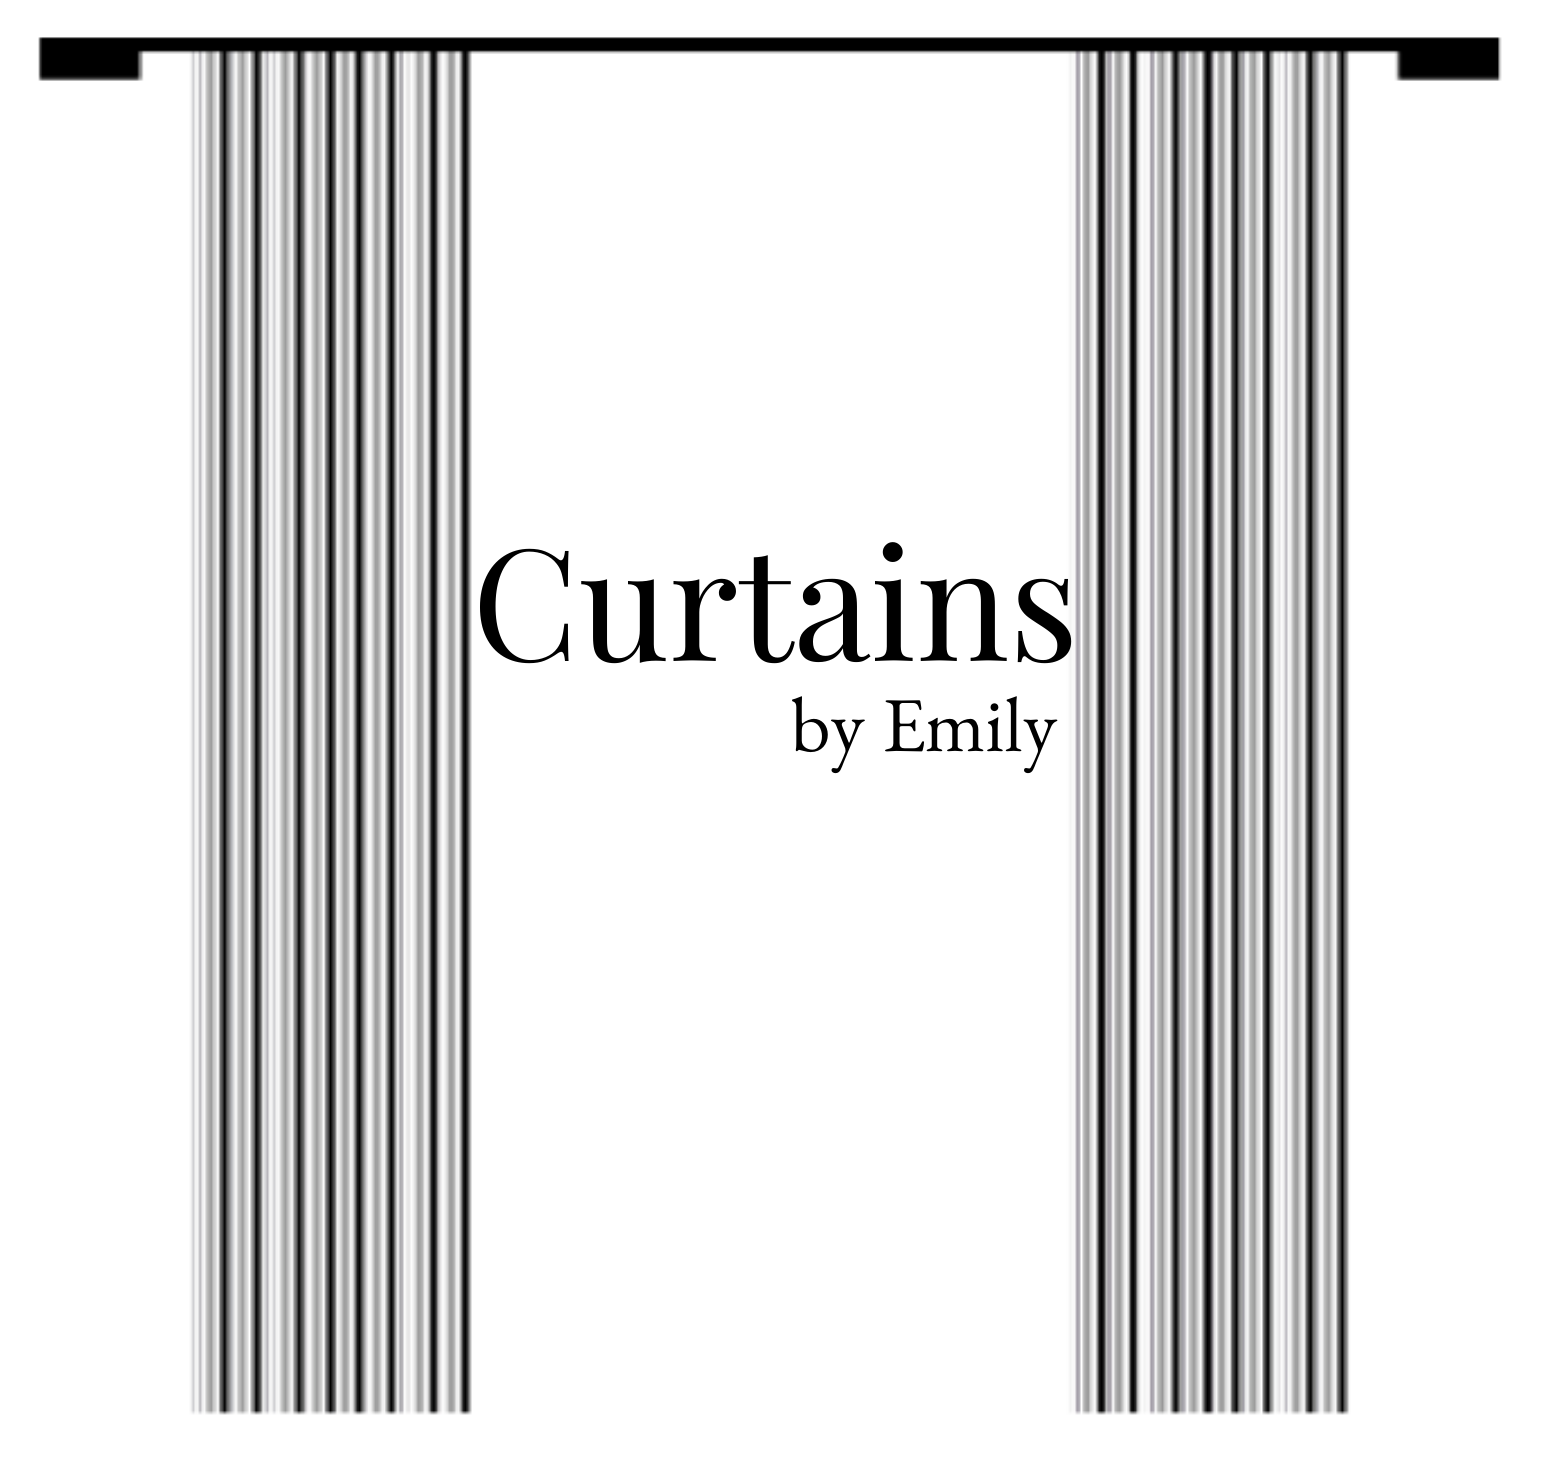 Curtains by Emily